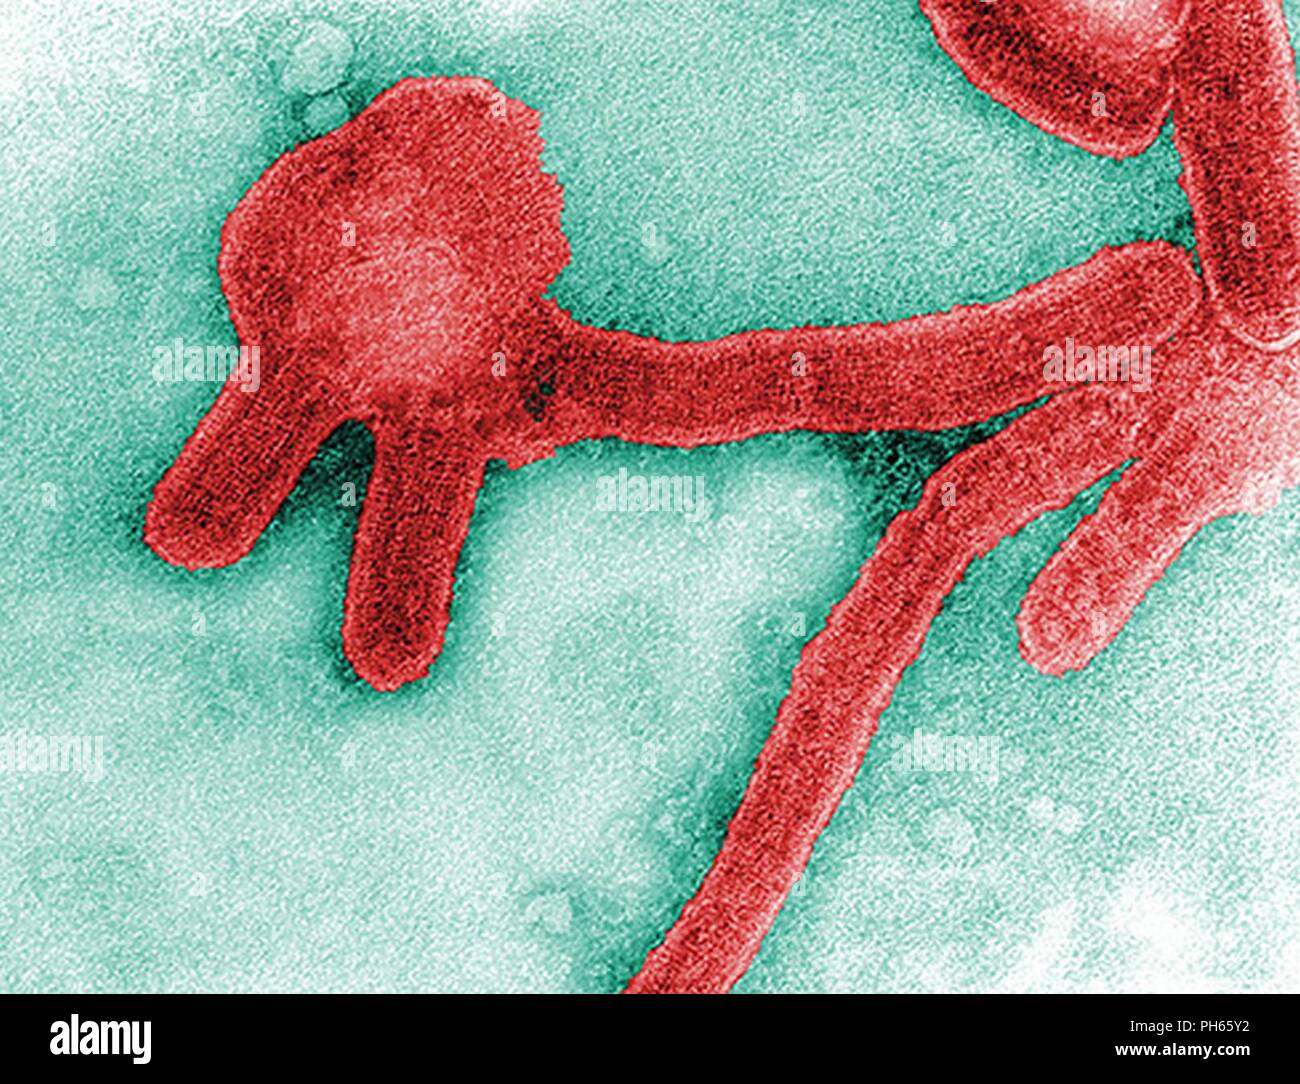 1968  F. A. Murphy; Cynthia Goldsmith    This colorized negative stained transmission electron micrograph (TEM), captured by F.A. Murphy in 1968, depicts a number of Marburg virus virions, which had been grown in an environment of tissue culture cells. Marburg hemorrhagic fever is a rare, severe type of hemorrhagic fever which affects both humans and non-human primates. Caused by a genetically unique zoonotic (that is, animal-borne) RNA virus of the filovirus family, its recognition led to the creation of this virus family. The four species of Ebola virus are the only other known members of th Stock Photo